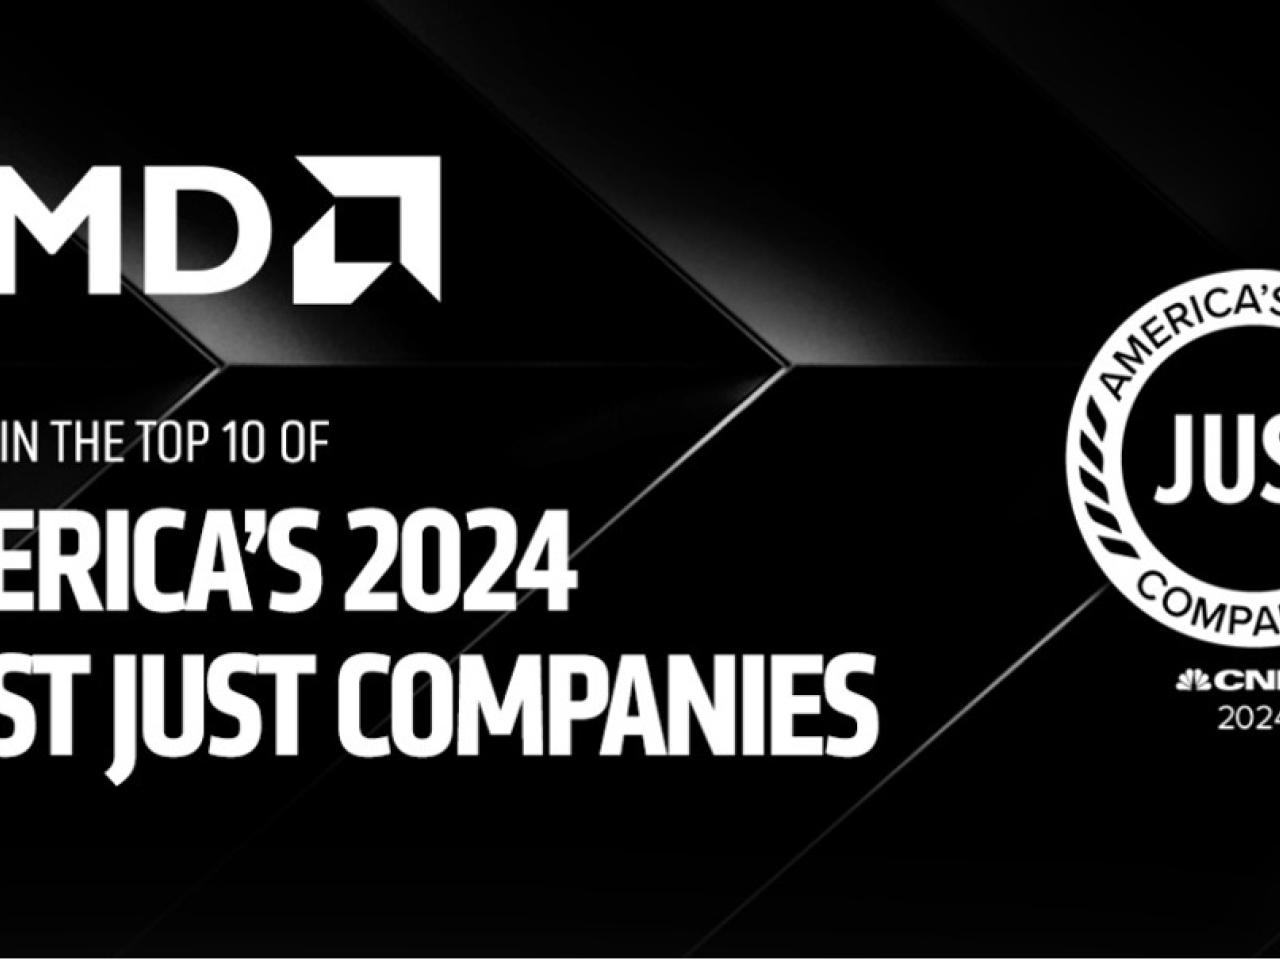 "AMD ranked in the top 10 of America's 2024 Most JUST Companies"